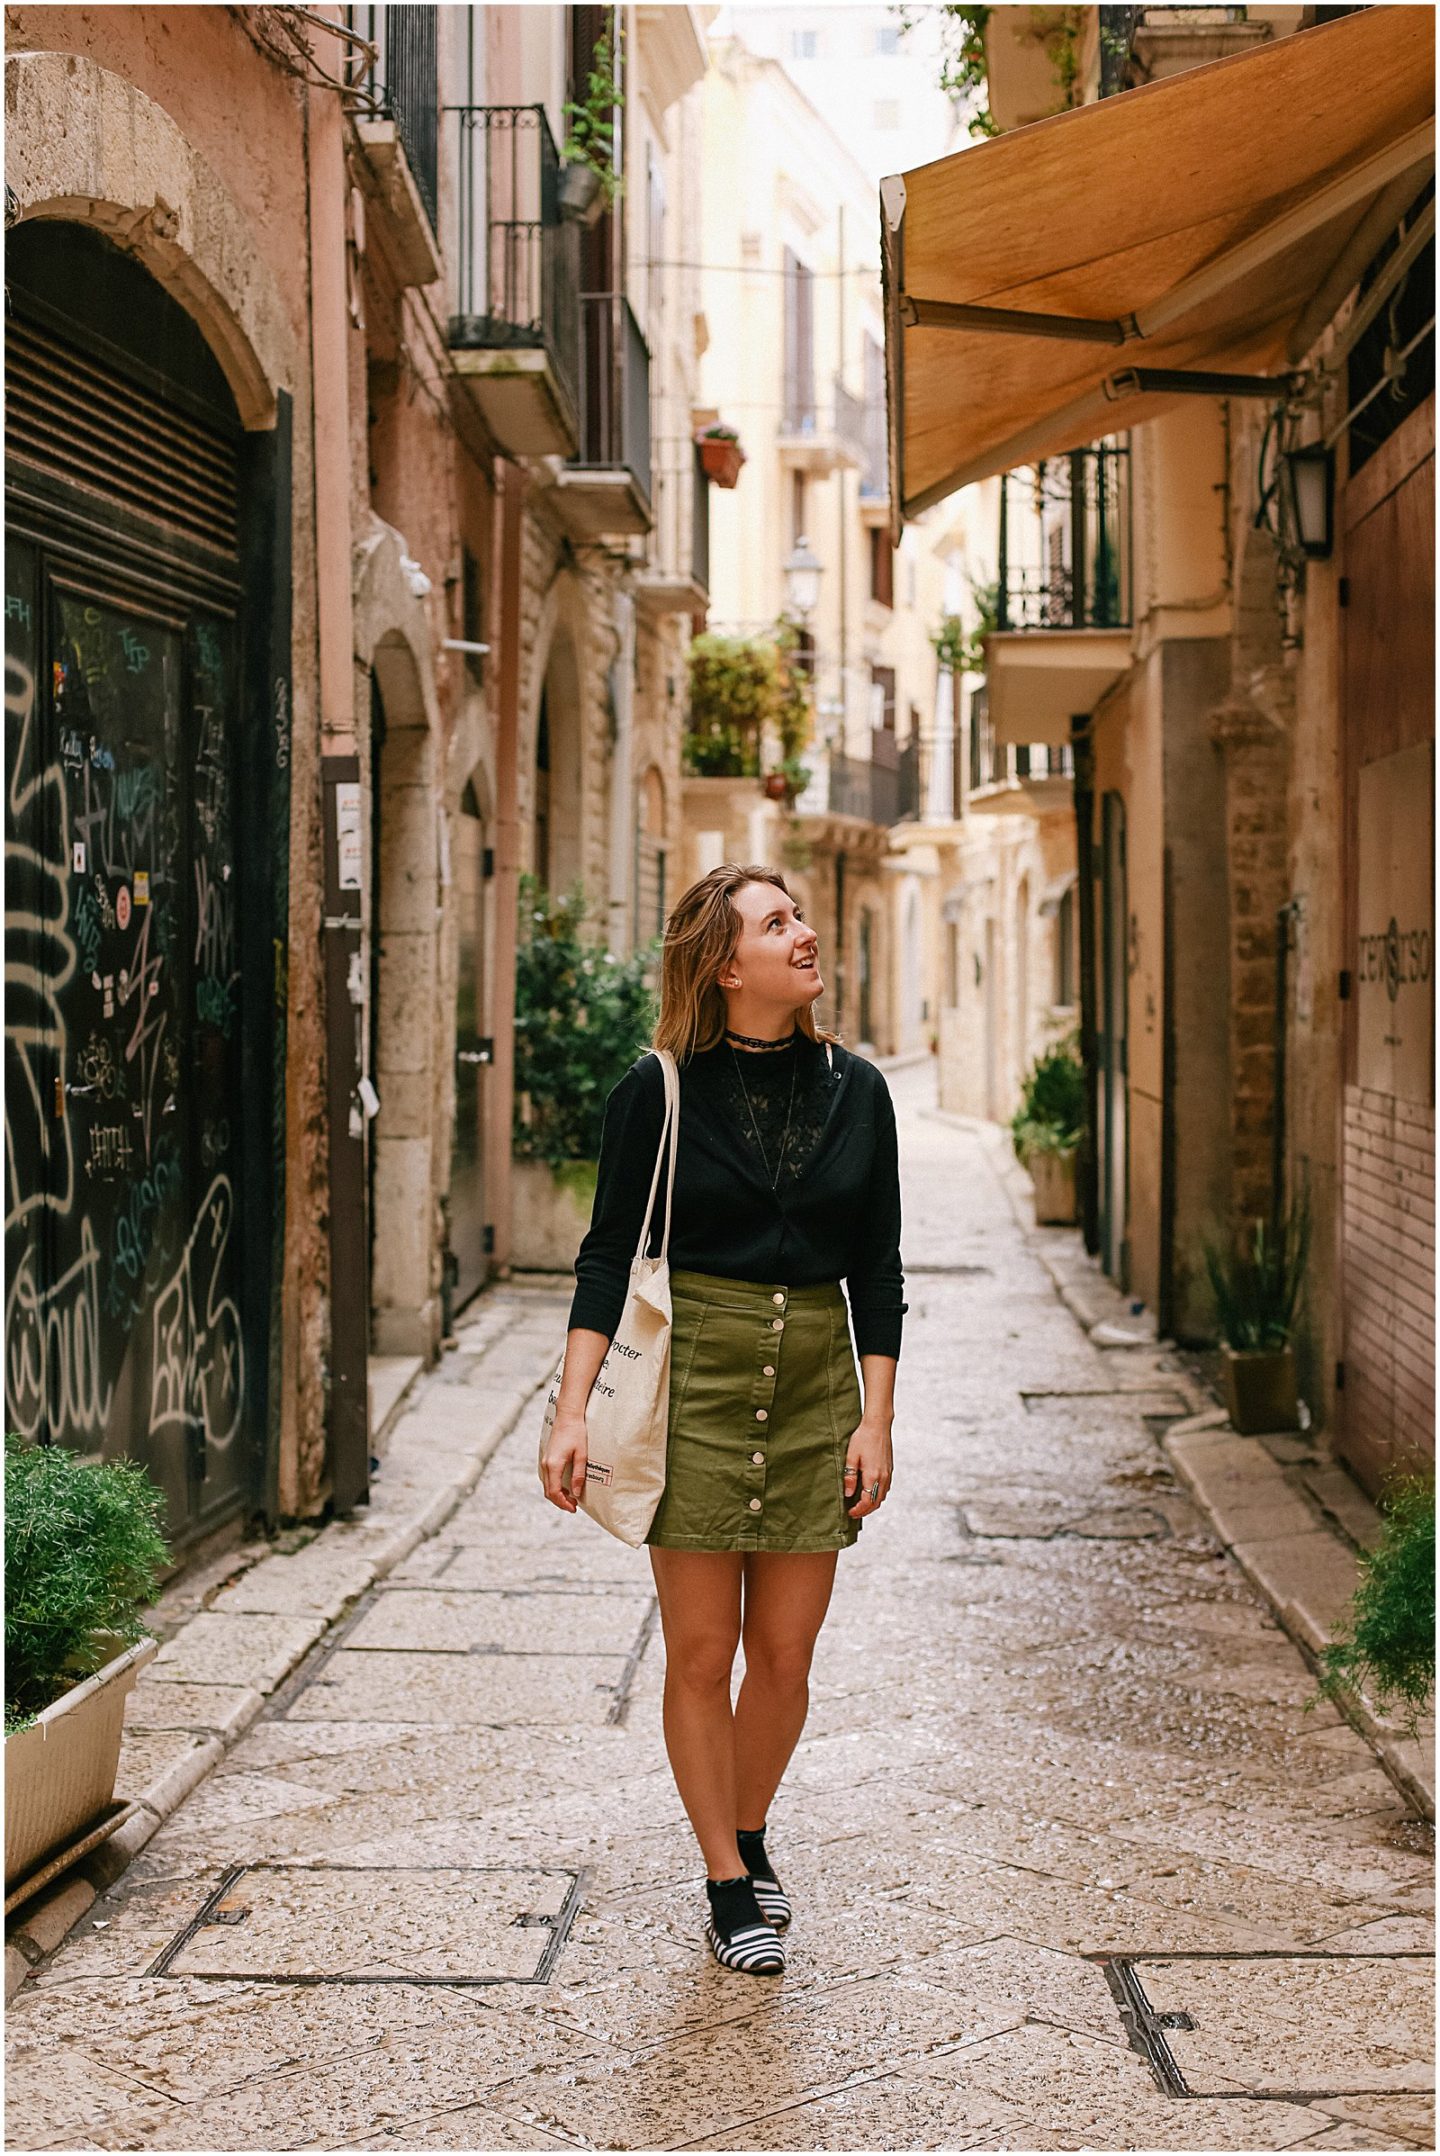 Helena Woods photographer walking in Bari's Old Town in Puglia Italy